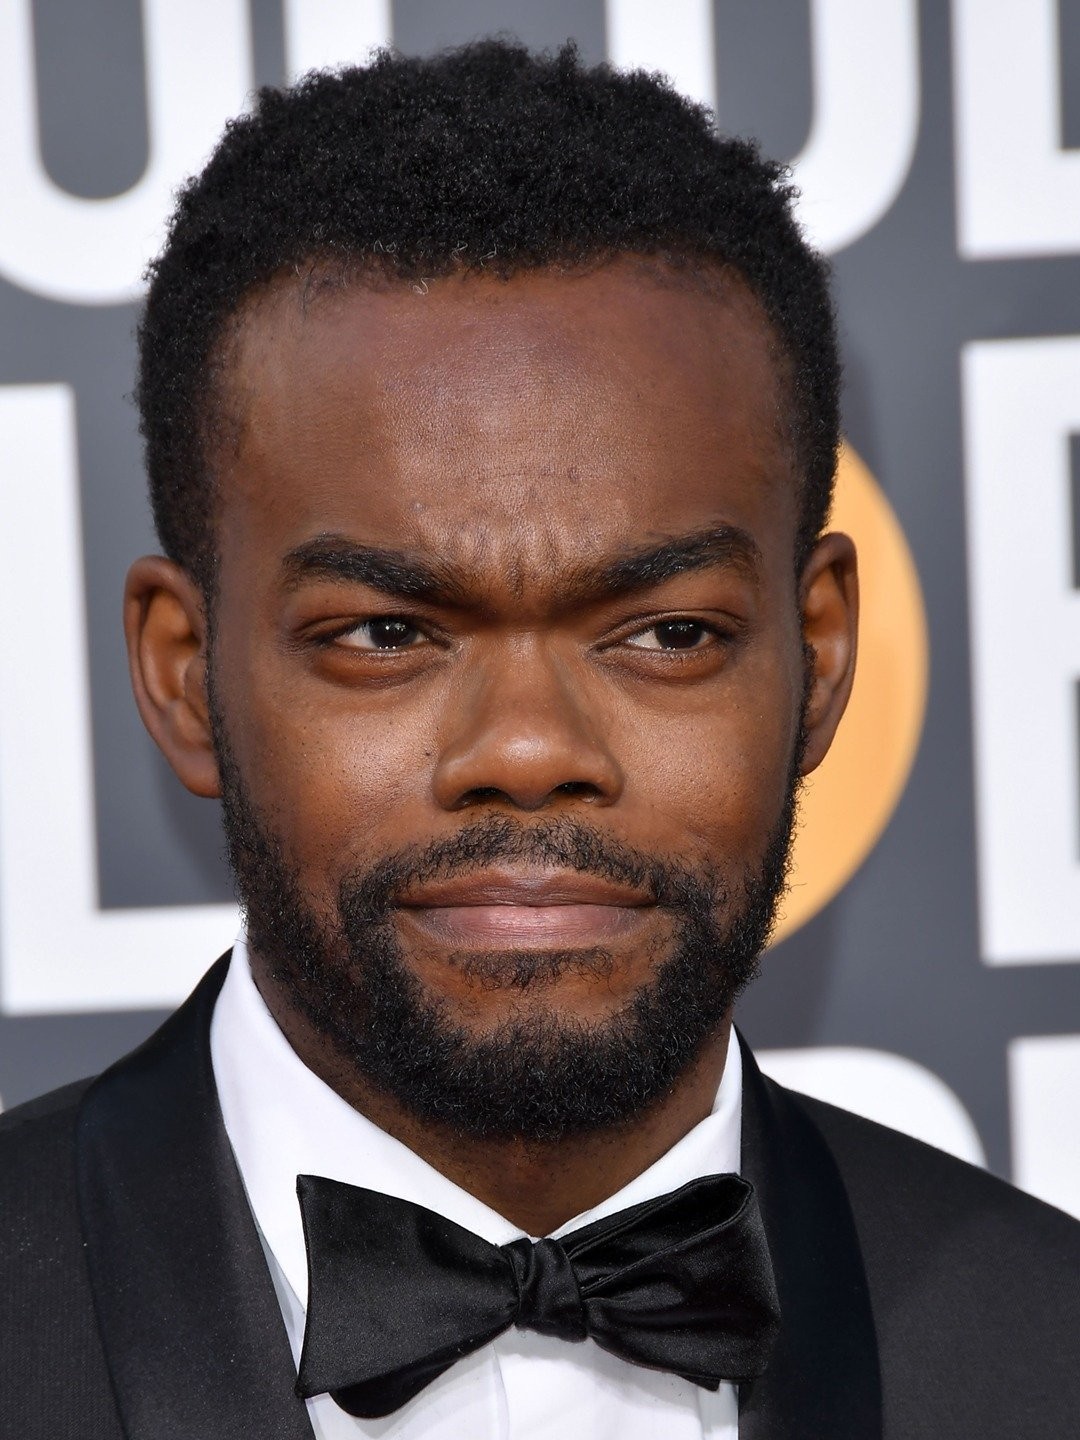 William Jackson Harper joins cast of Ant-Man and the Wasp